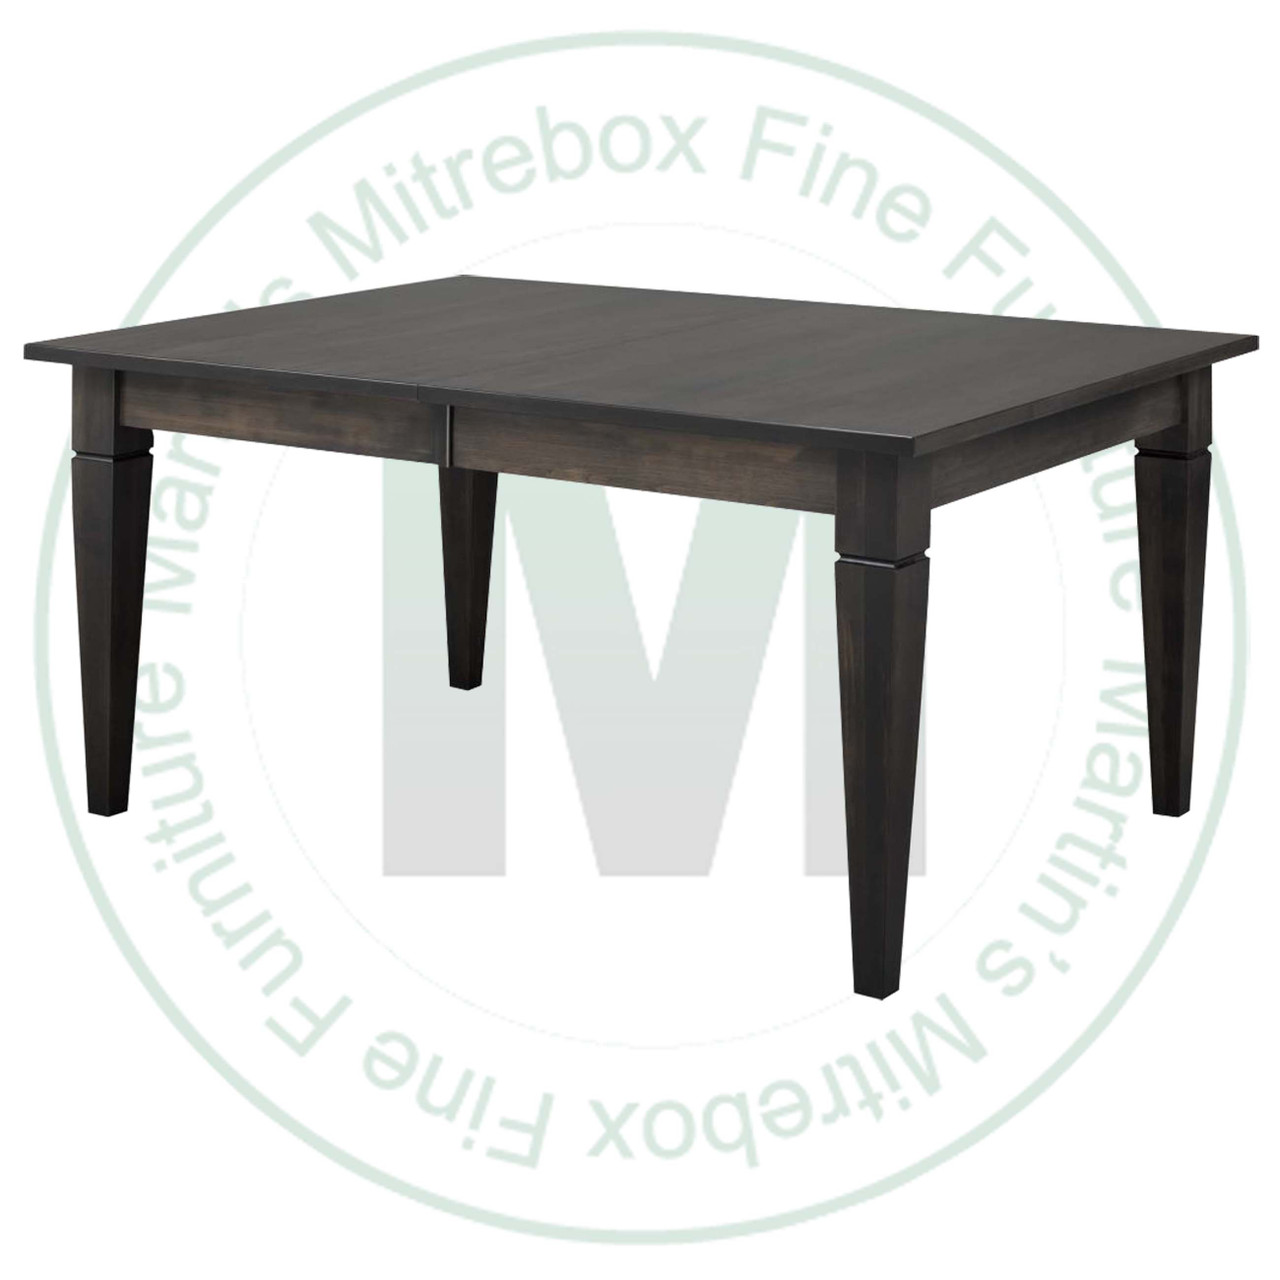 Maple Reesor Solid Top Harvest Table 36''D x 60''W x 30''H Table Has 1 3/4'' Thick Top And 2 - 16'' Extensions